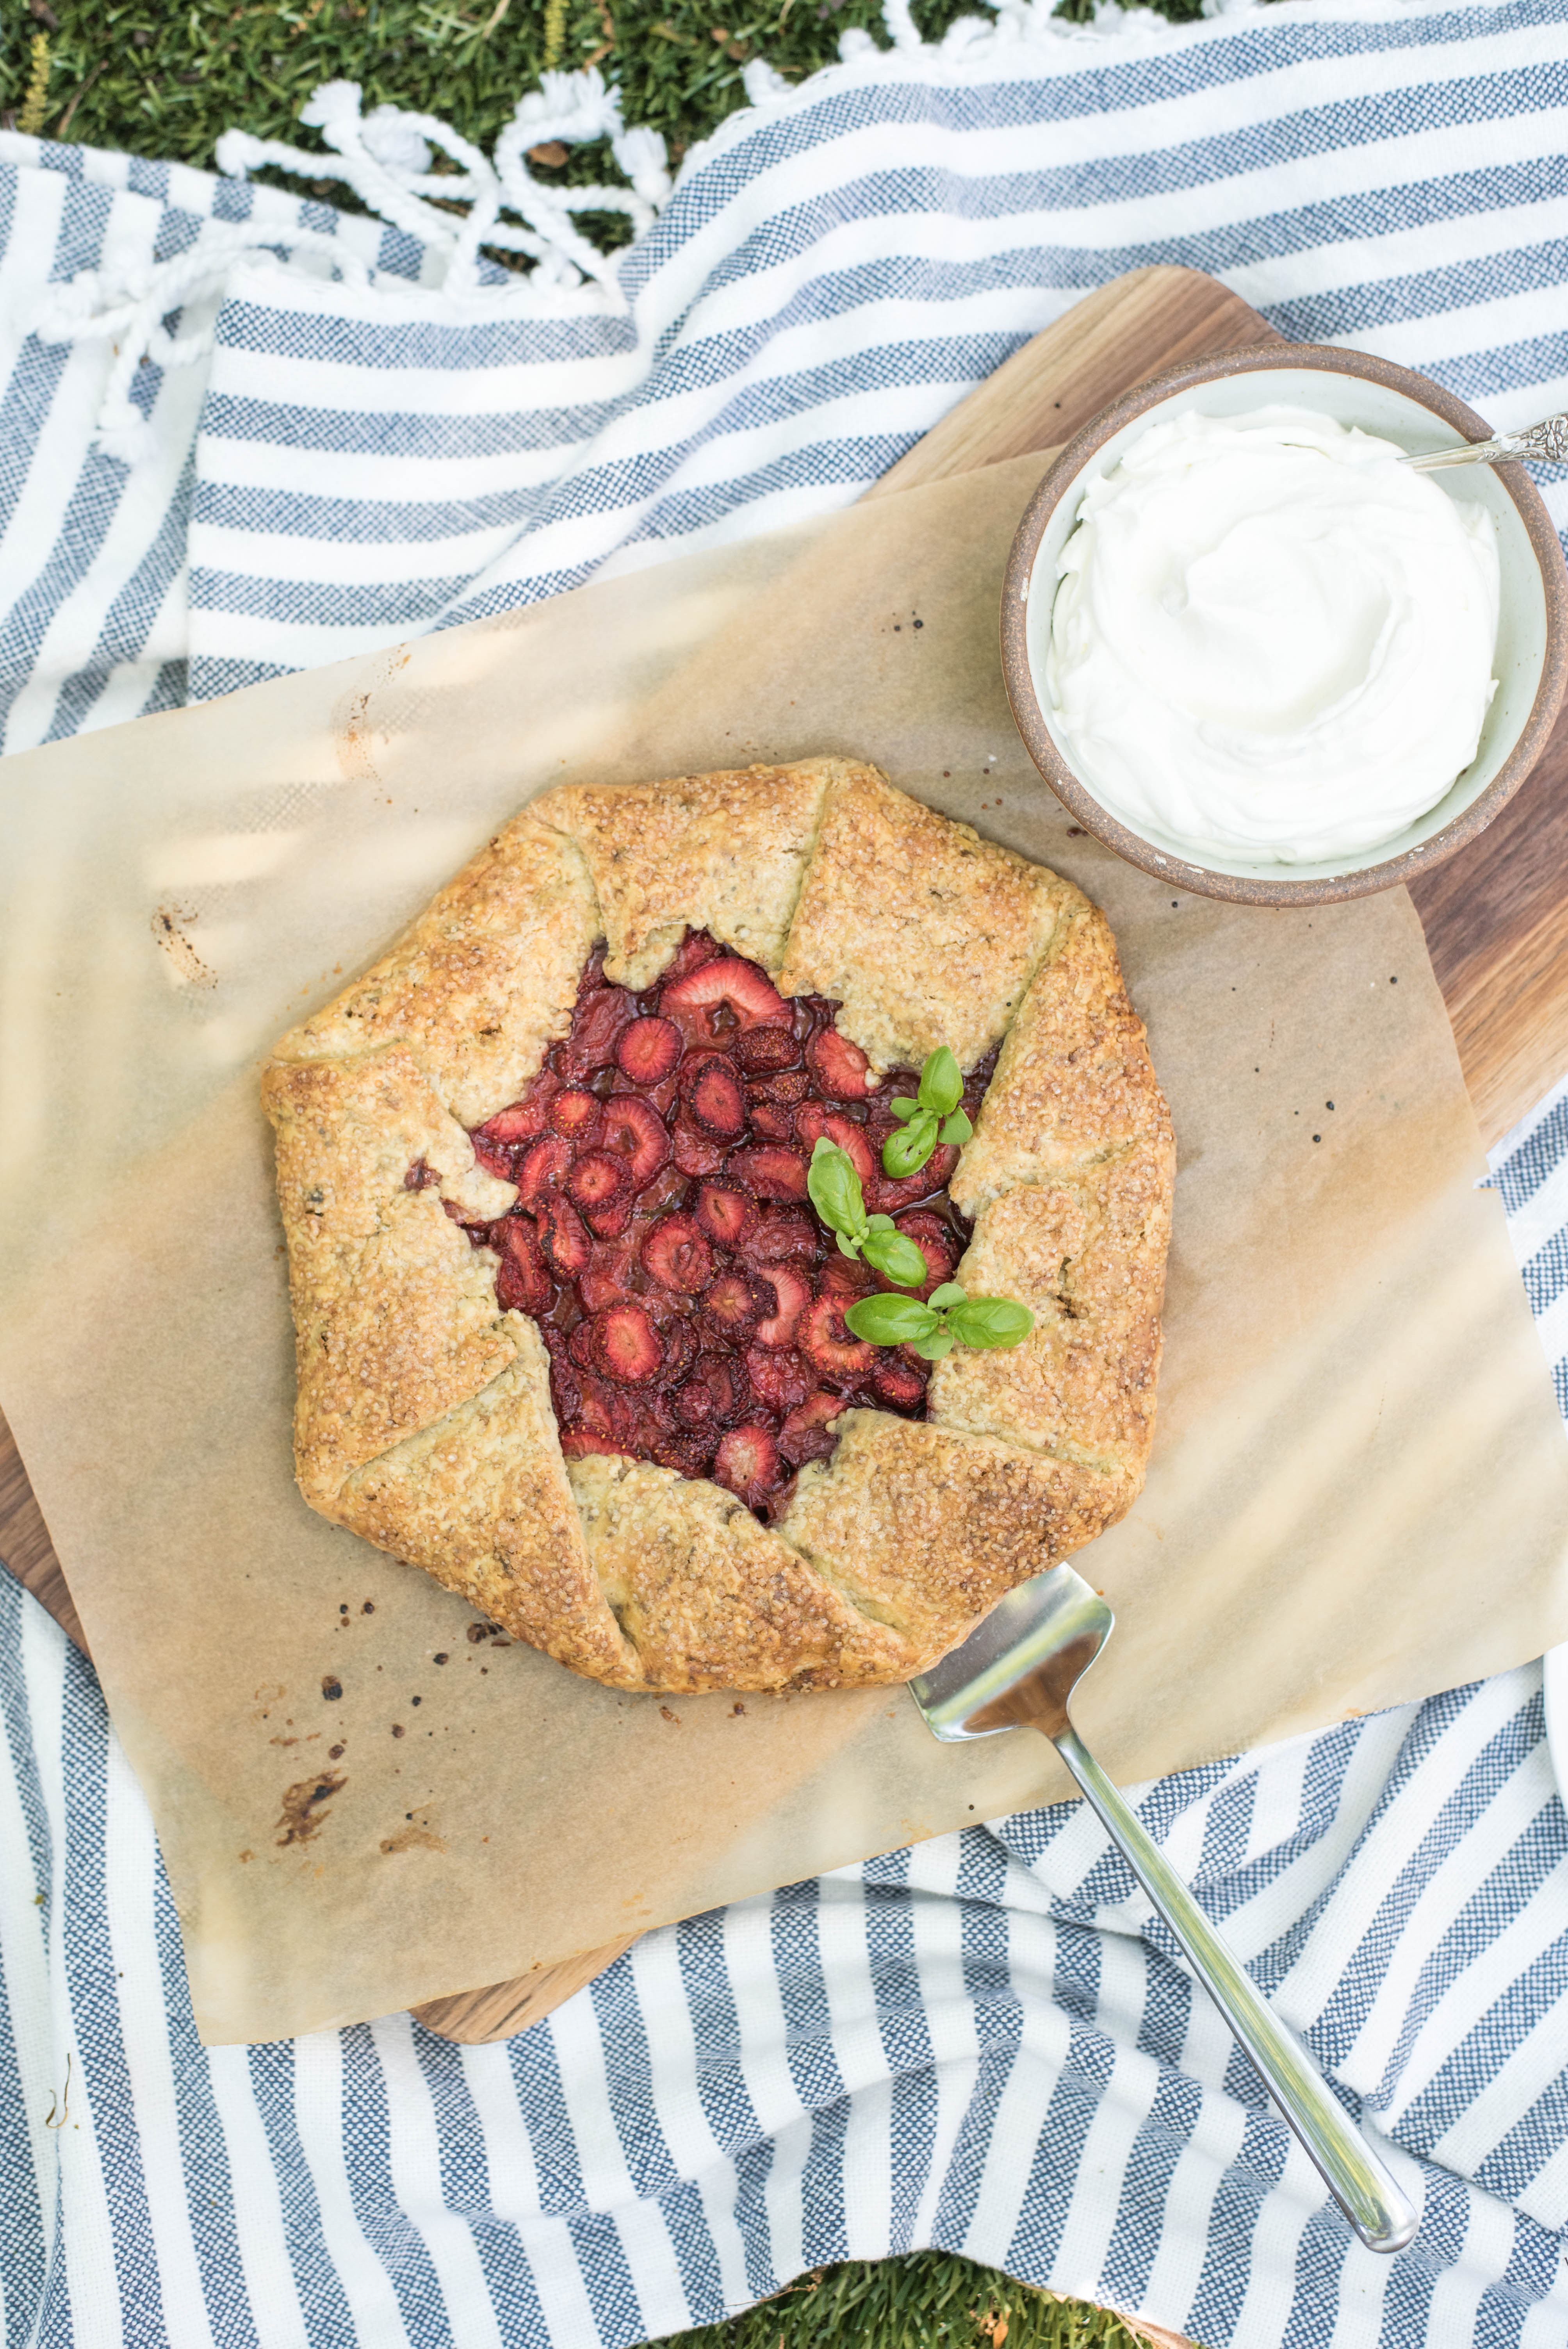 Strawberry Balsamic Galette with Pistachio Crust